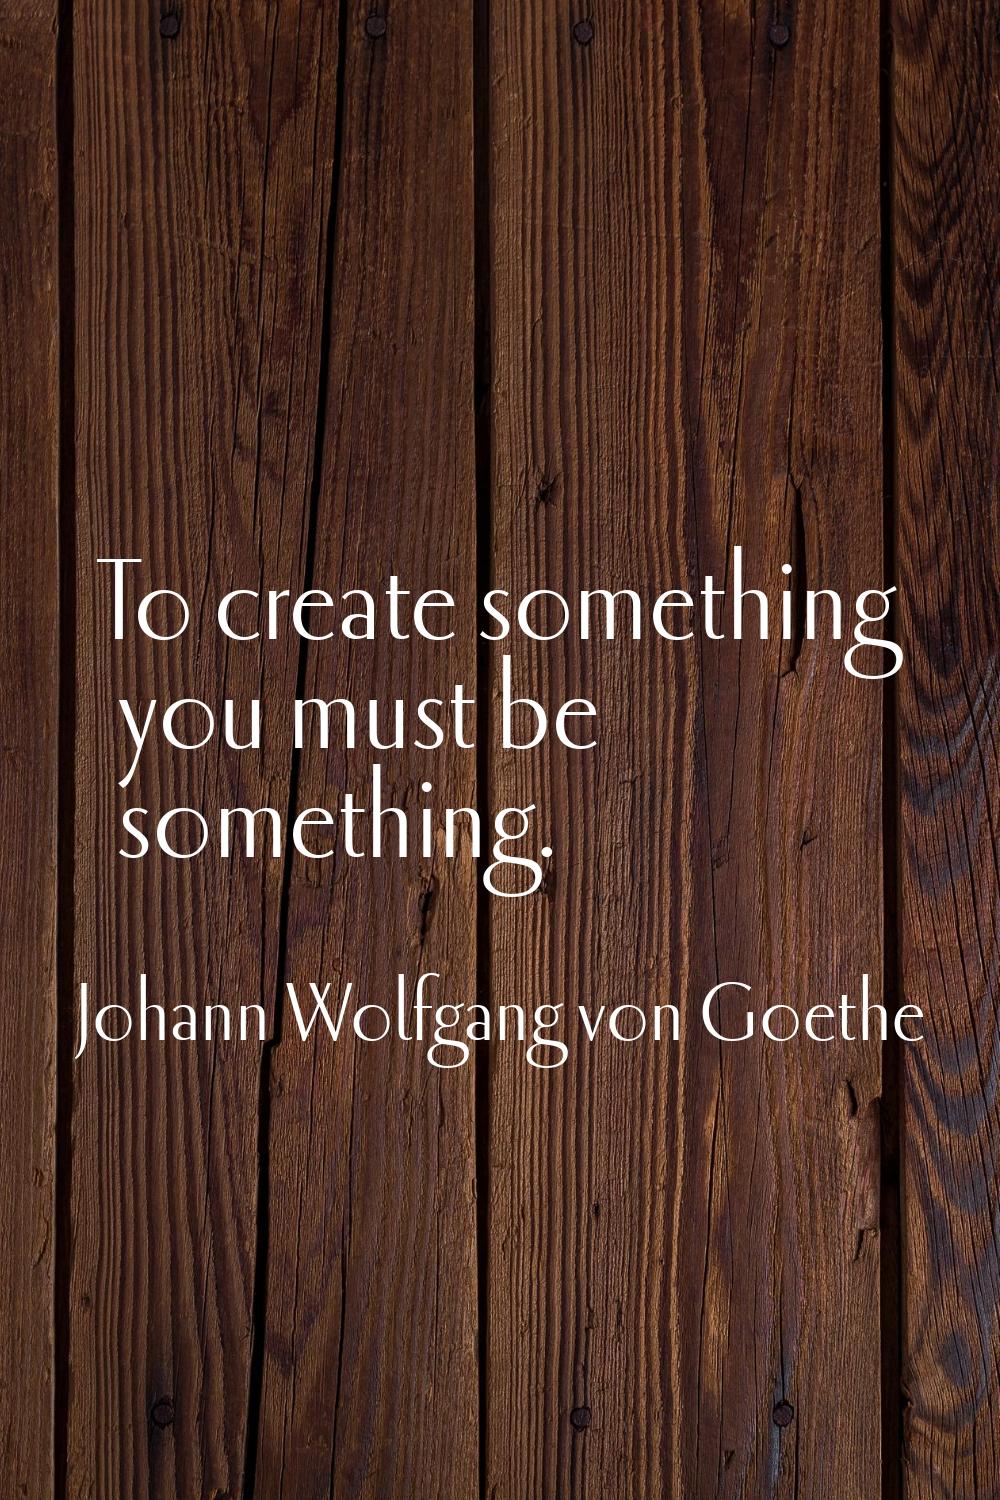 To create something you must be something.